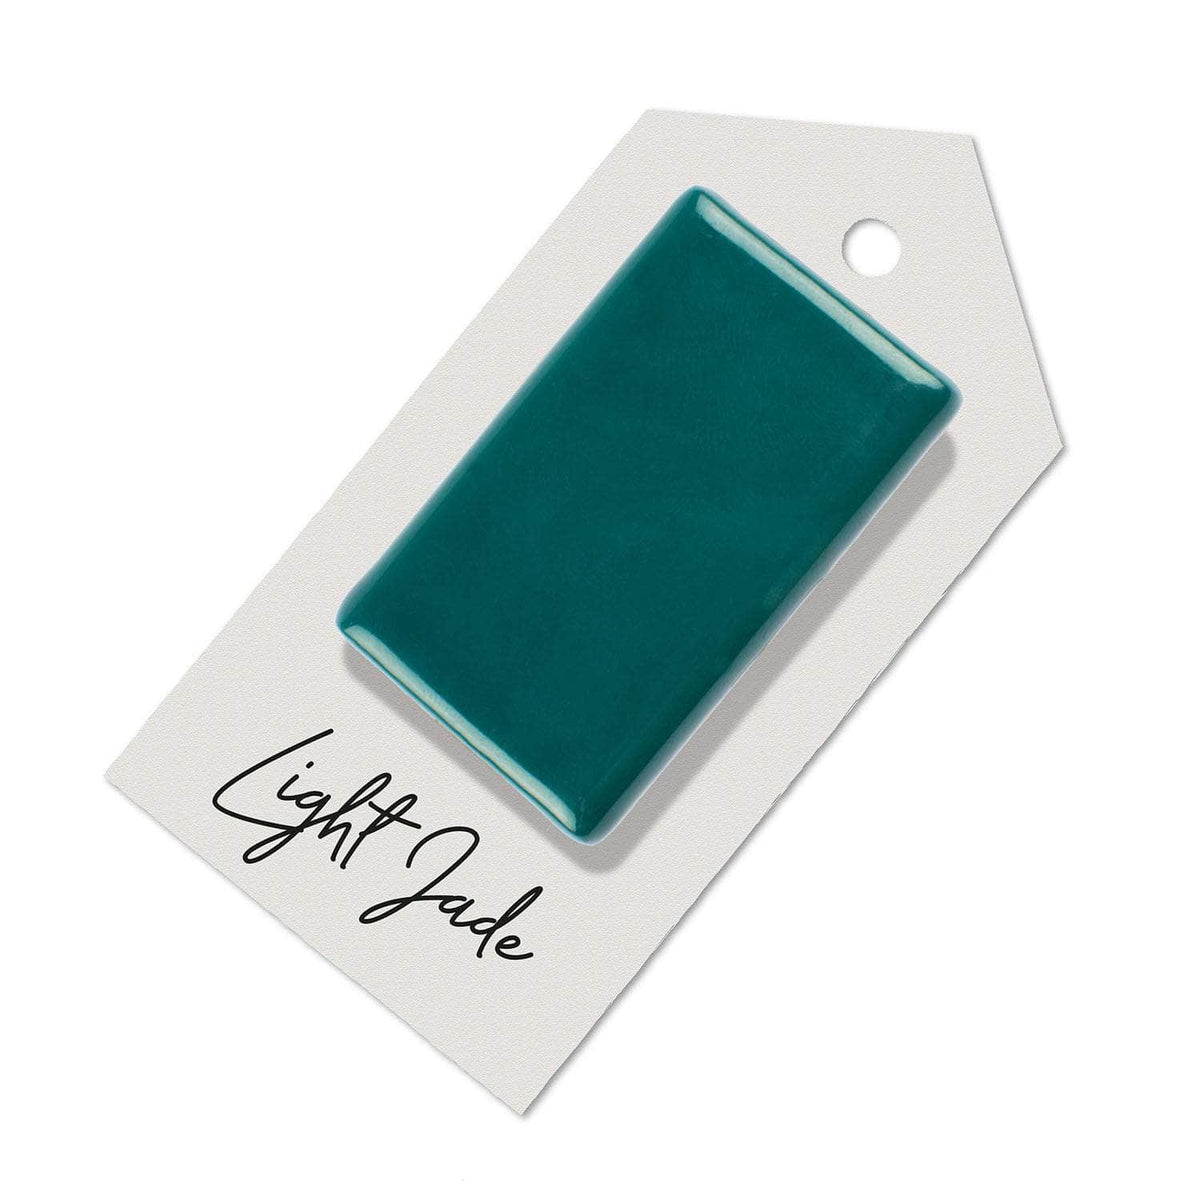 Light Jade Green sample for Aga range cooker re-enamelling &amp; reconditioned cookers